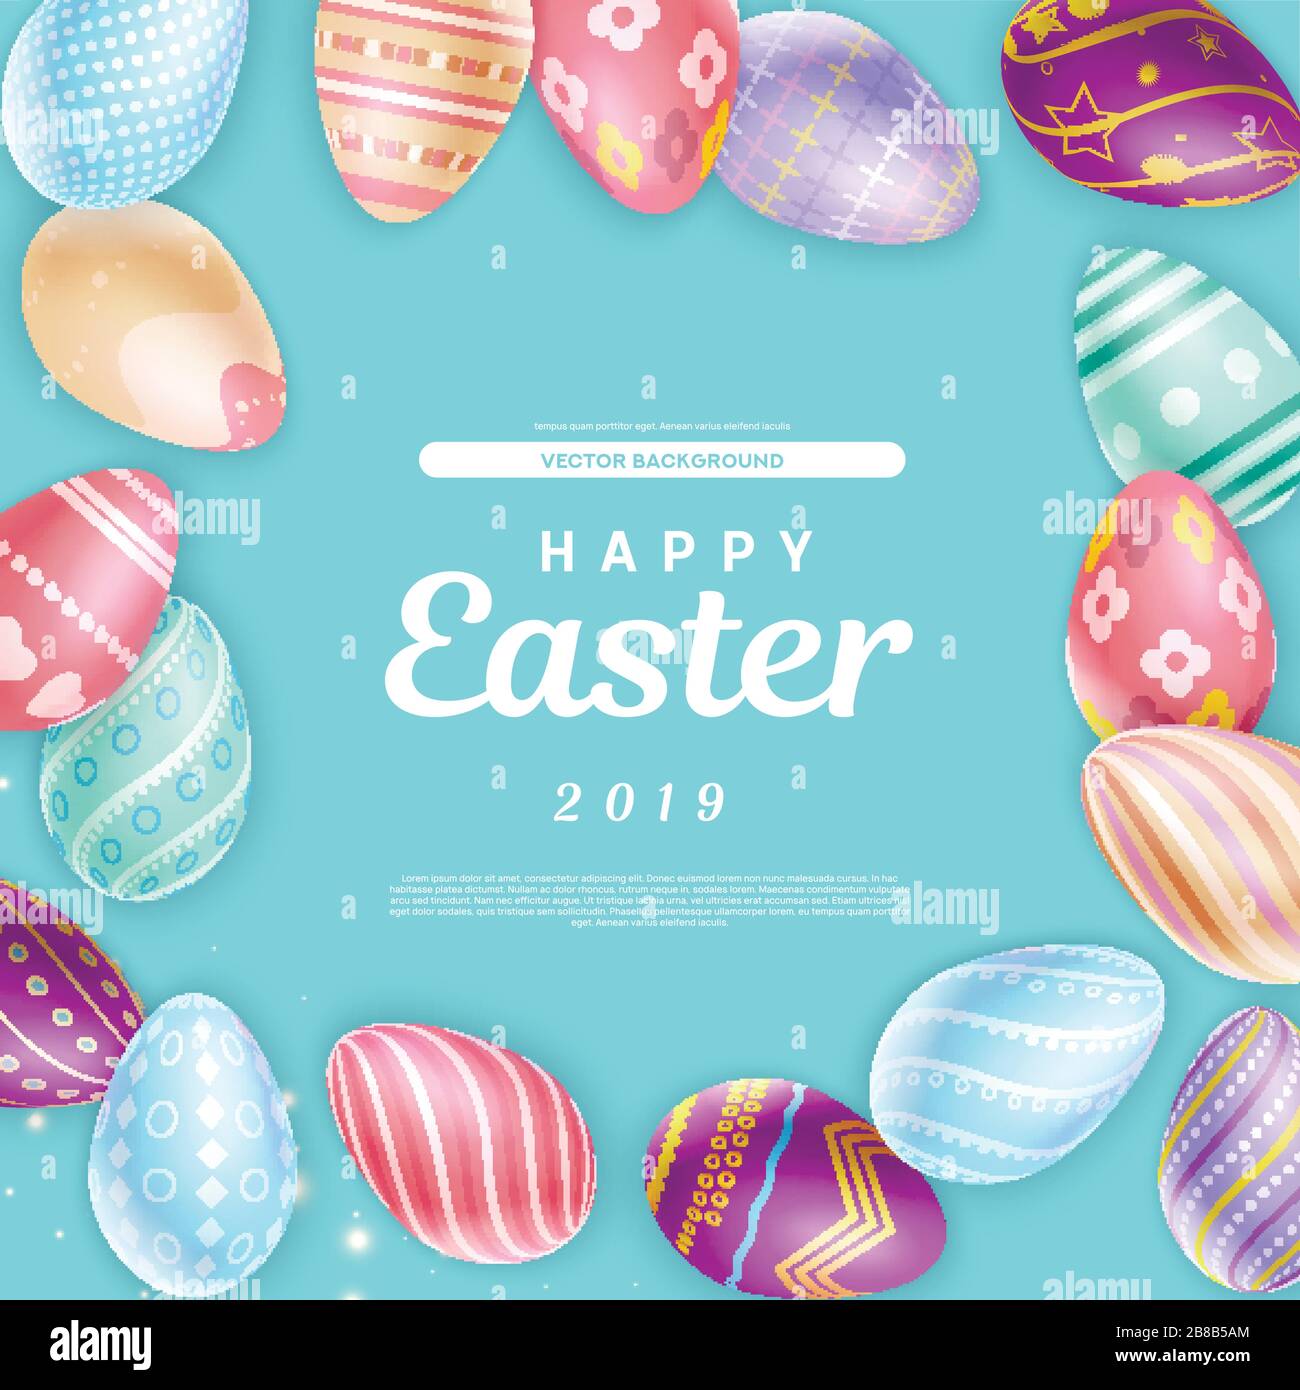 Happy easter 2019 Stock Vector Images - Alamy